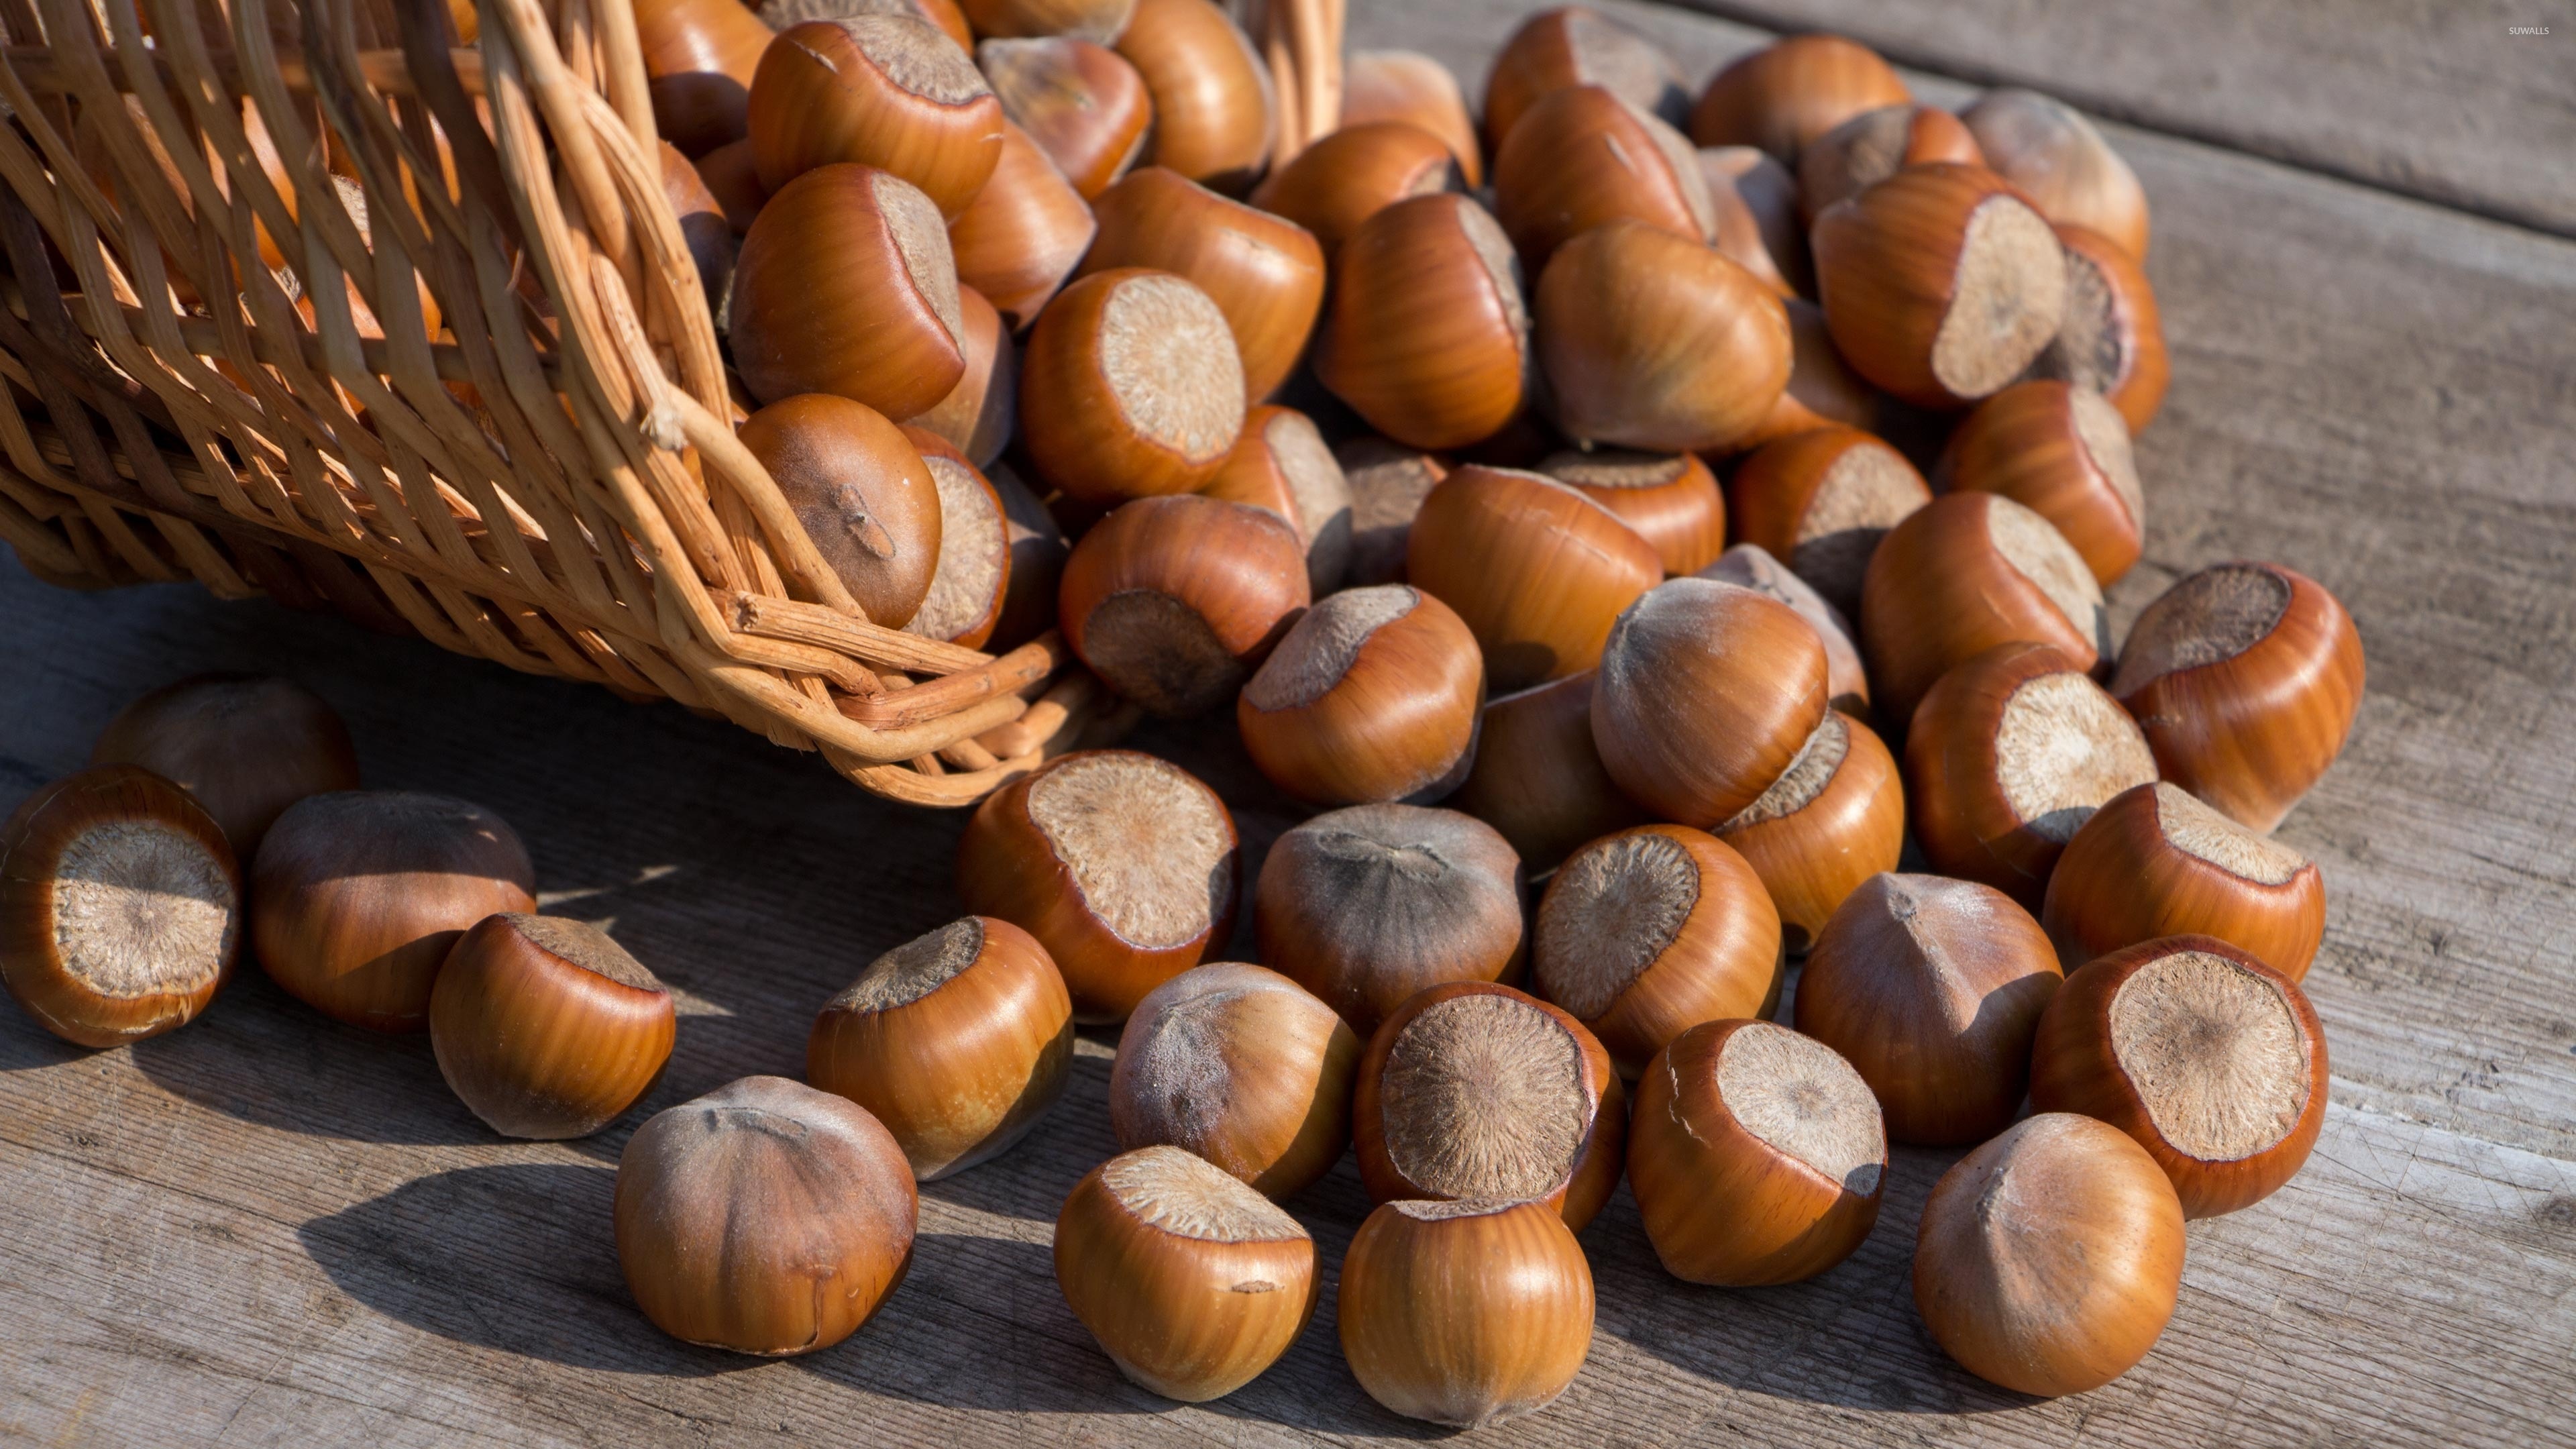 Hazelnuts: One of the richest sources of vitamin E, Used in dairy and confectionery items. 3840x2160 4K Wallpaper.